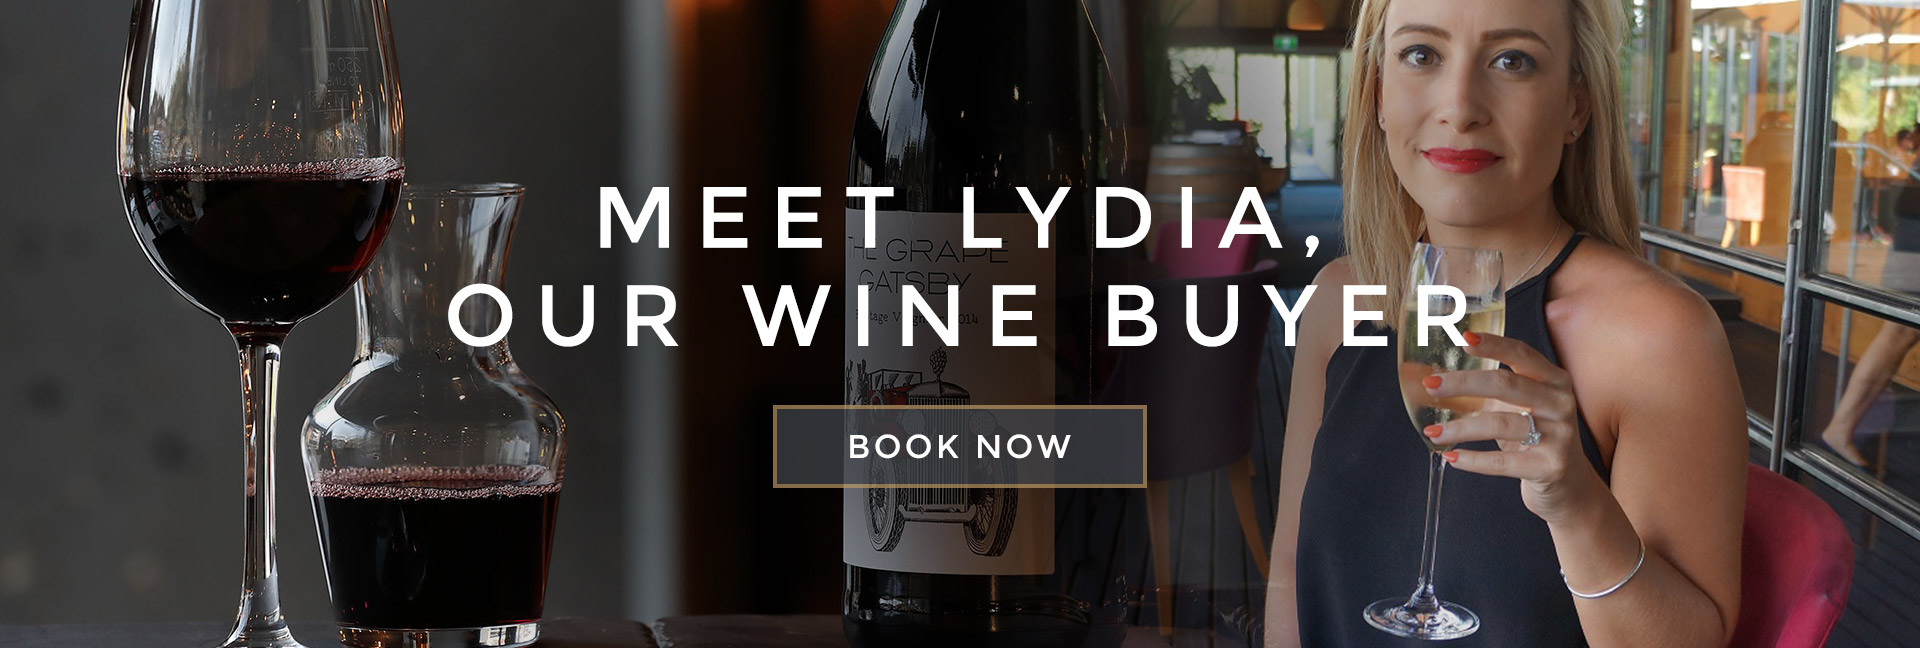 Meet Lydia, our wine buyer at All Bar One Houndsditch